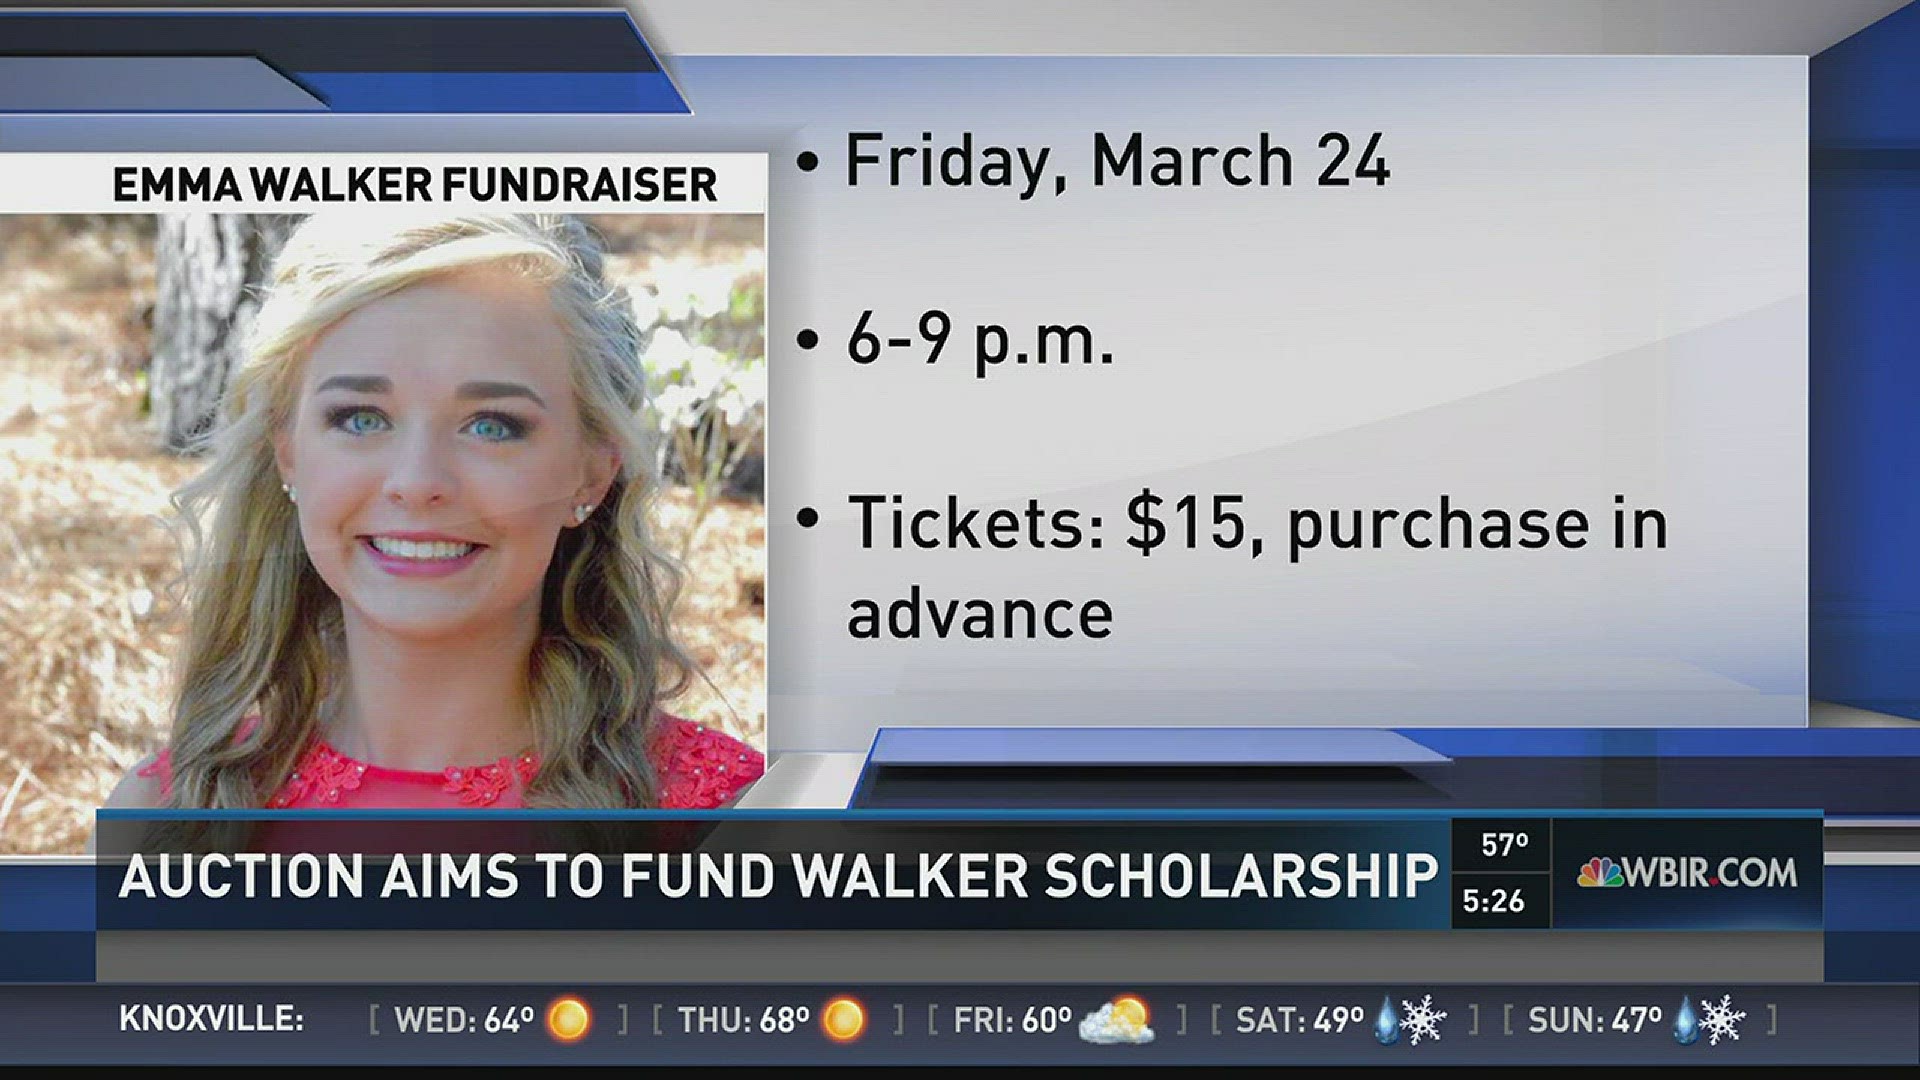 The Central High School student was shot inside her home. Police charged her ex-boyfriend with the crime. Her family & friends are working to raise money for a scholarship in her name